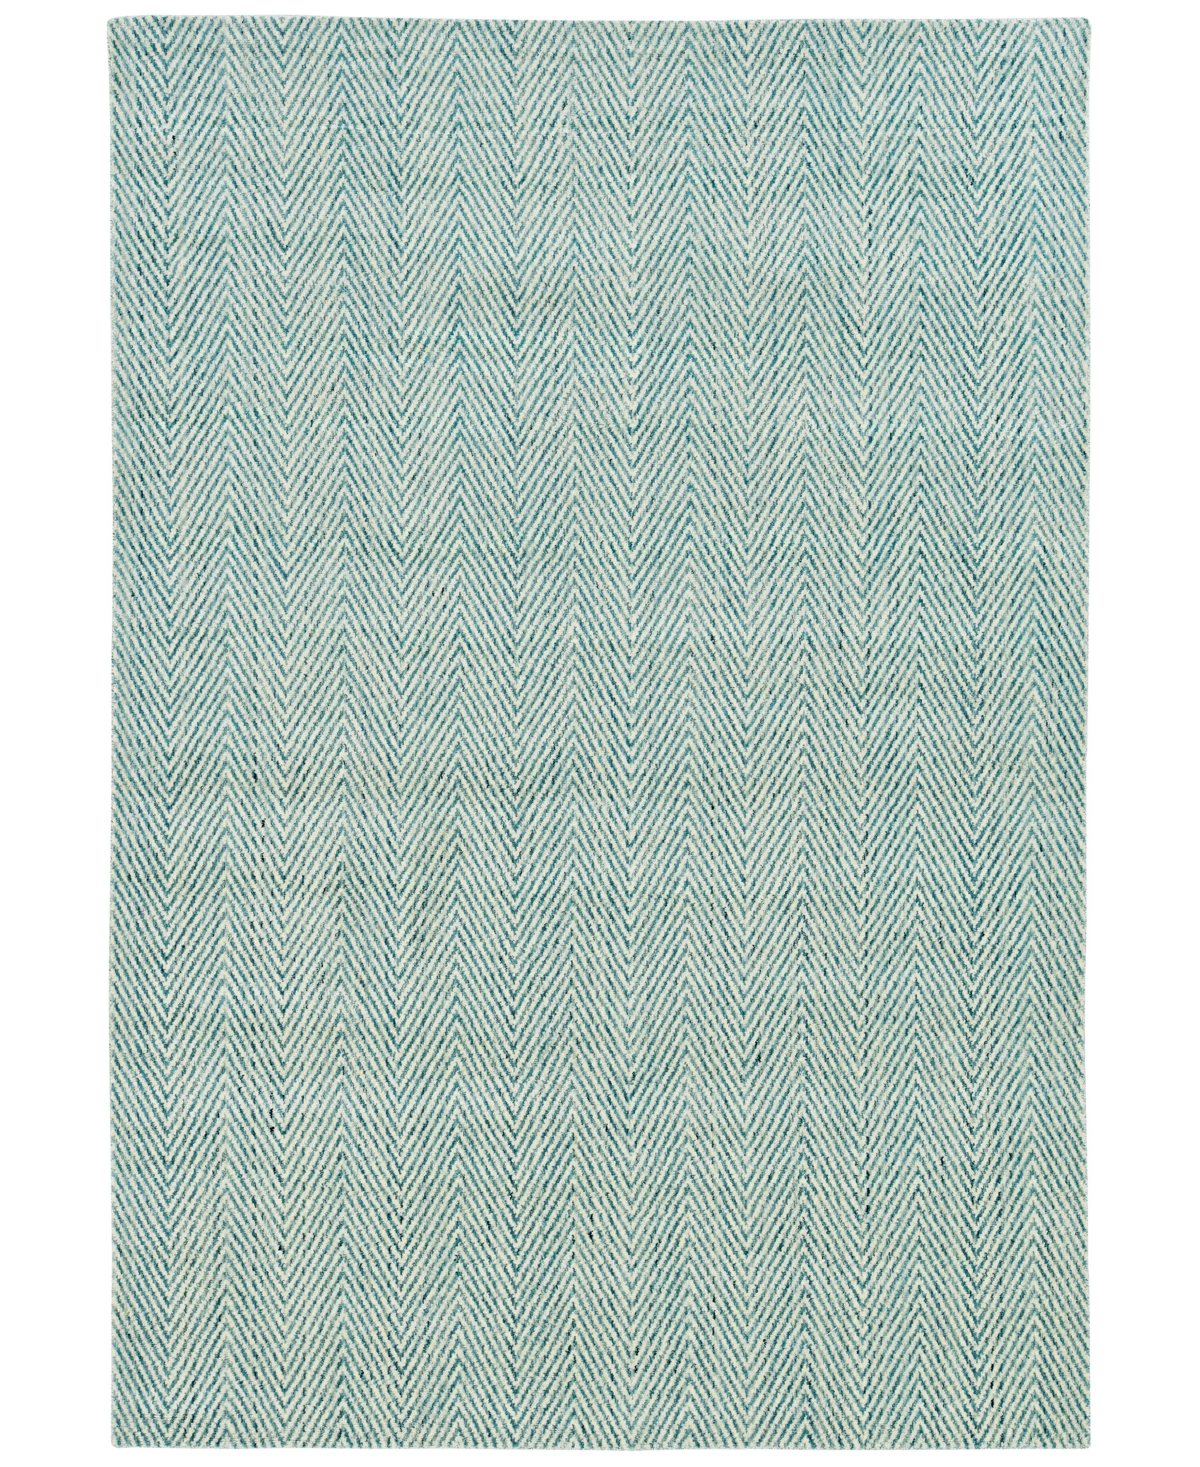 Km Home Miro 100 2' X 3' Area Rug In Mint